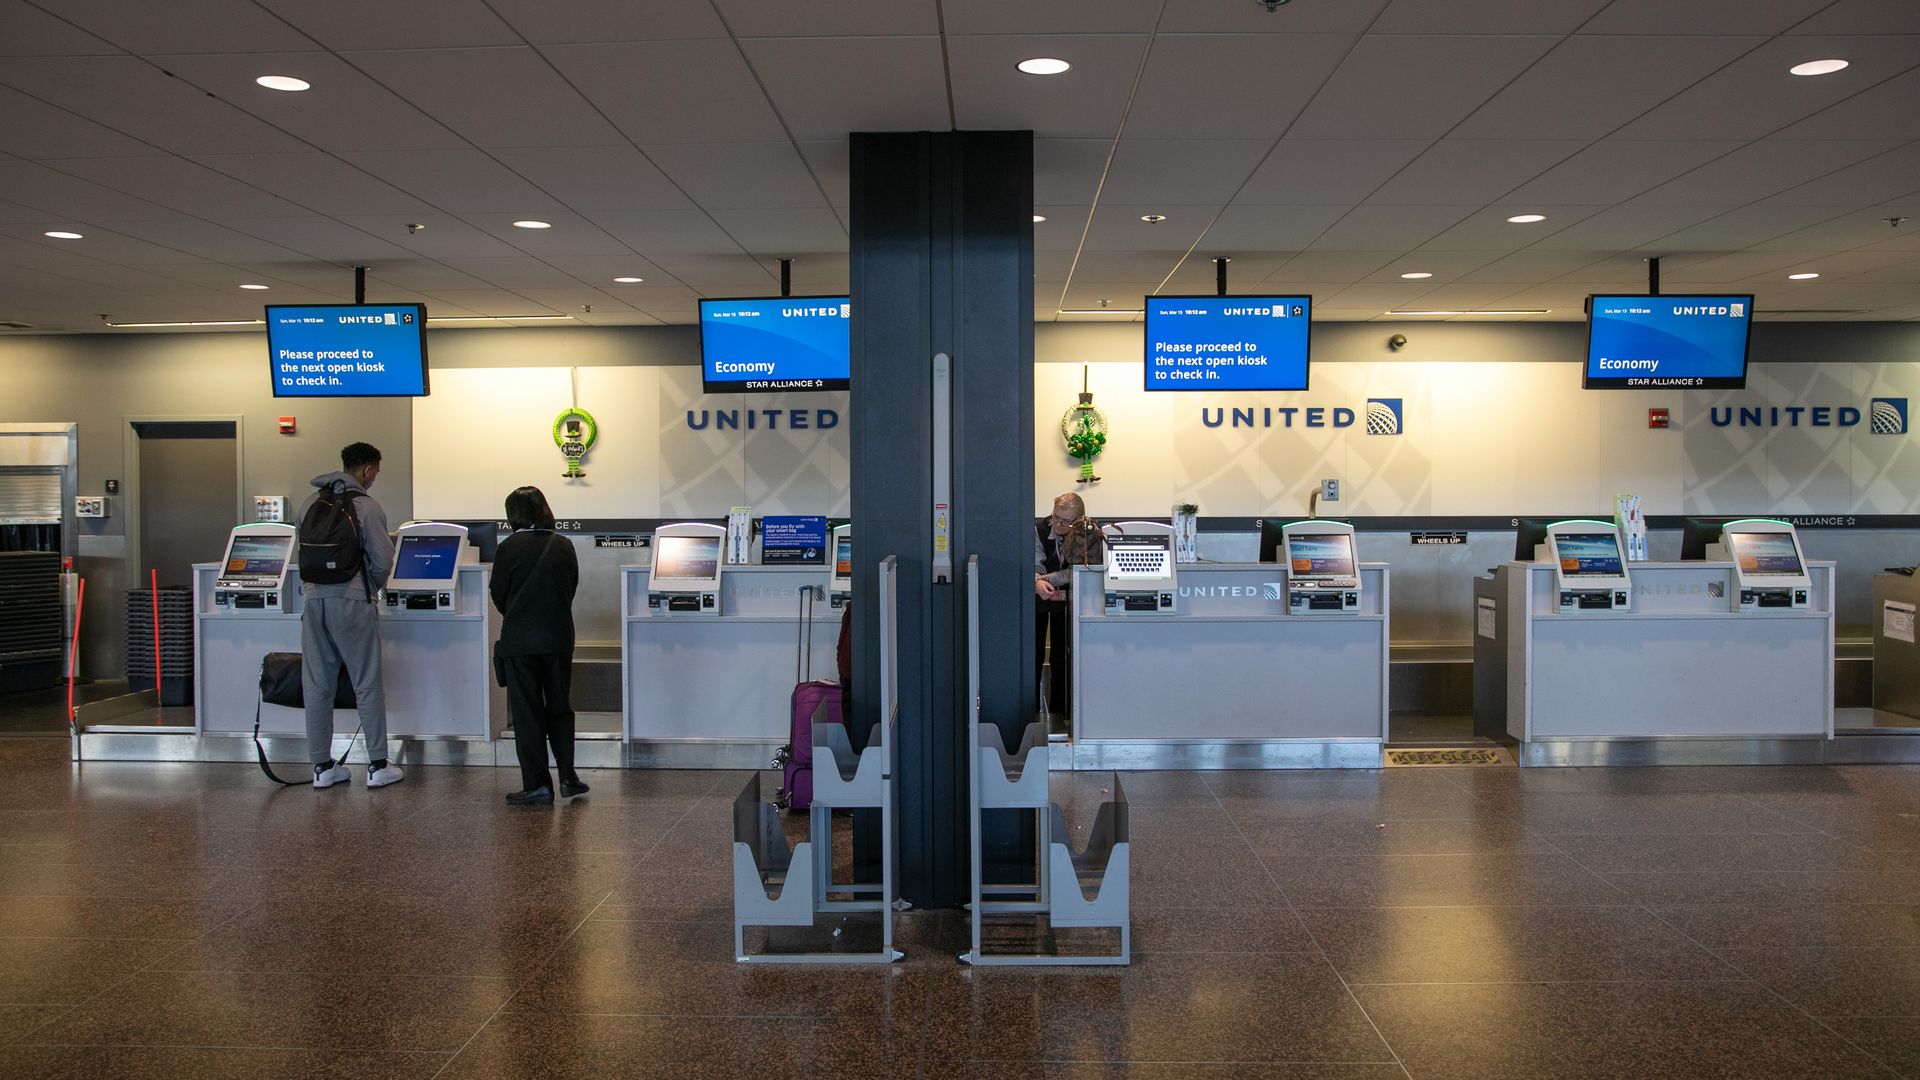 In this image, two people check luggage at a United Airlines counter.